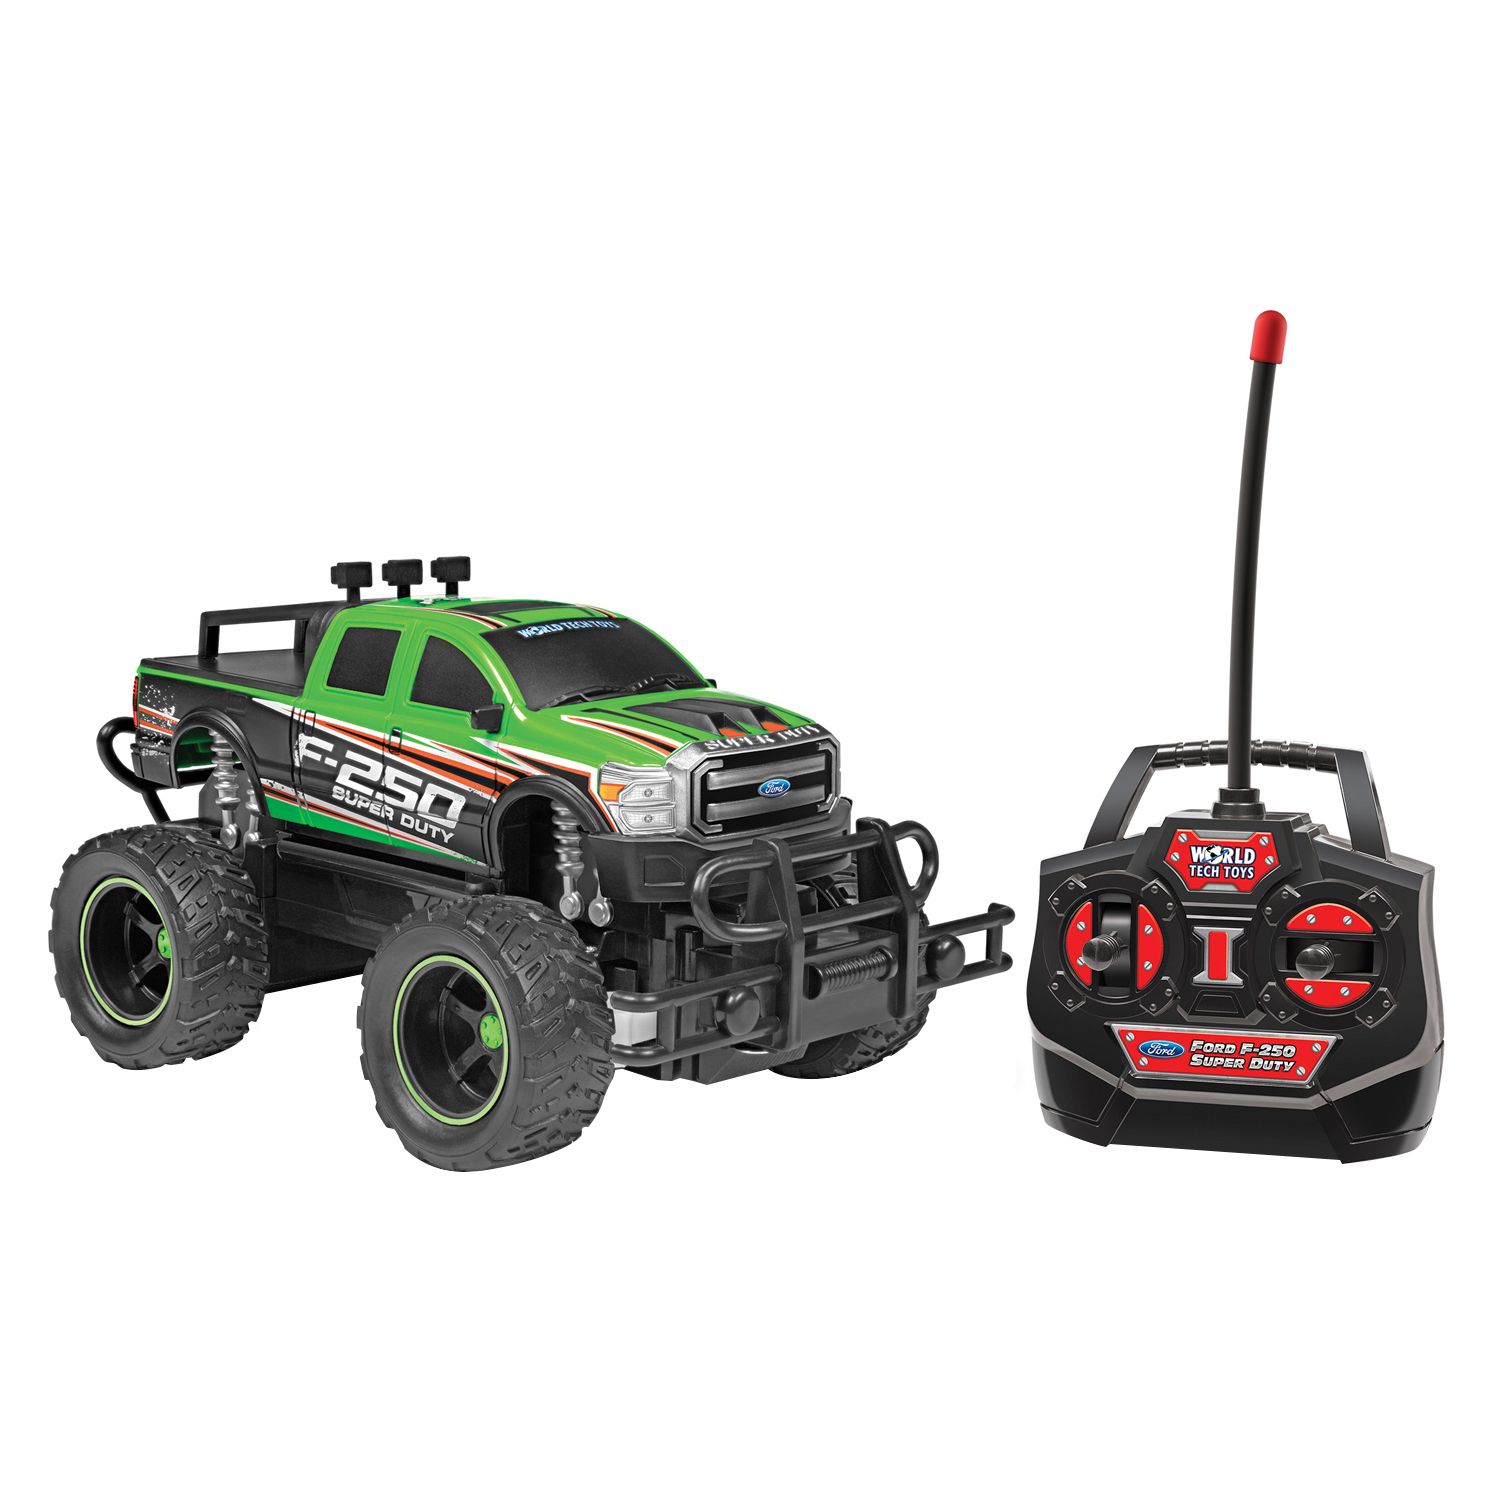 Remote Control Toys: Race off to 